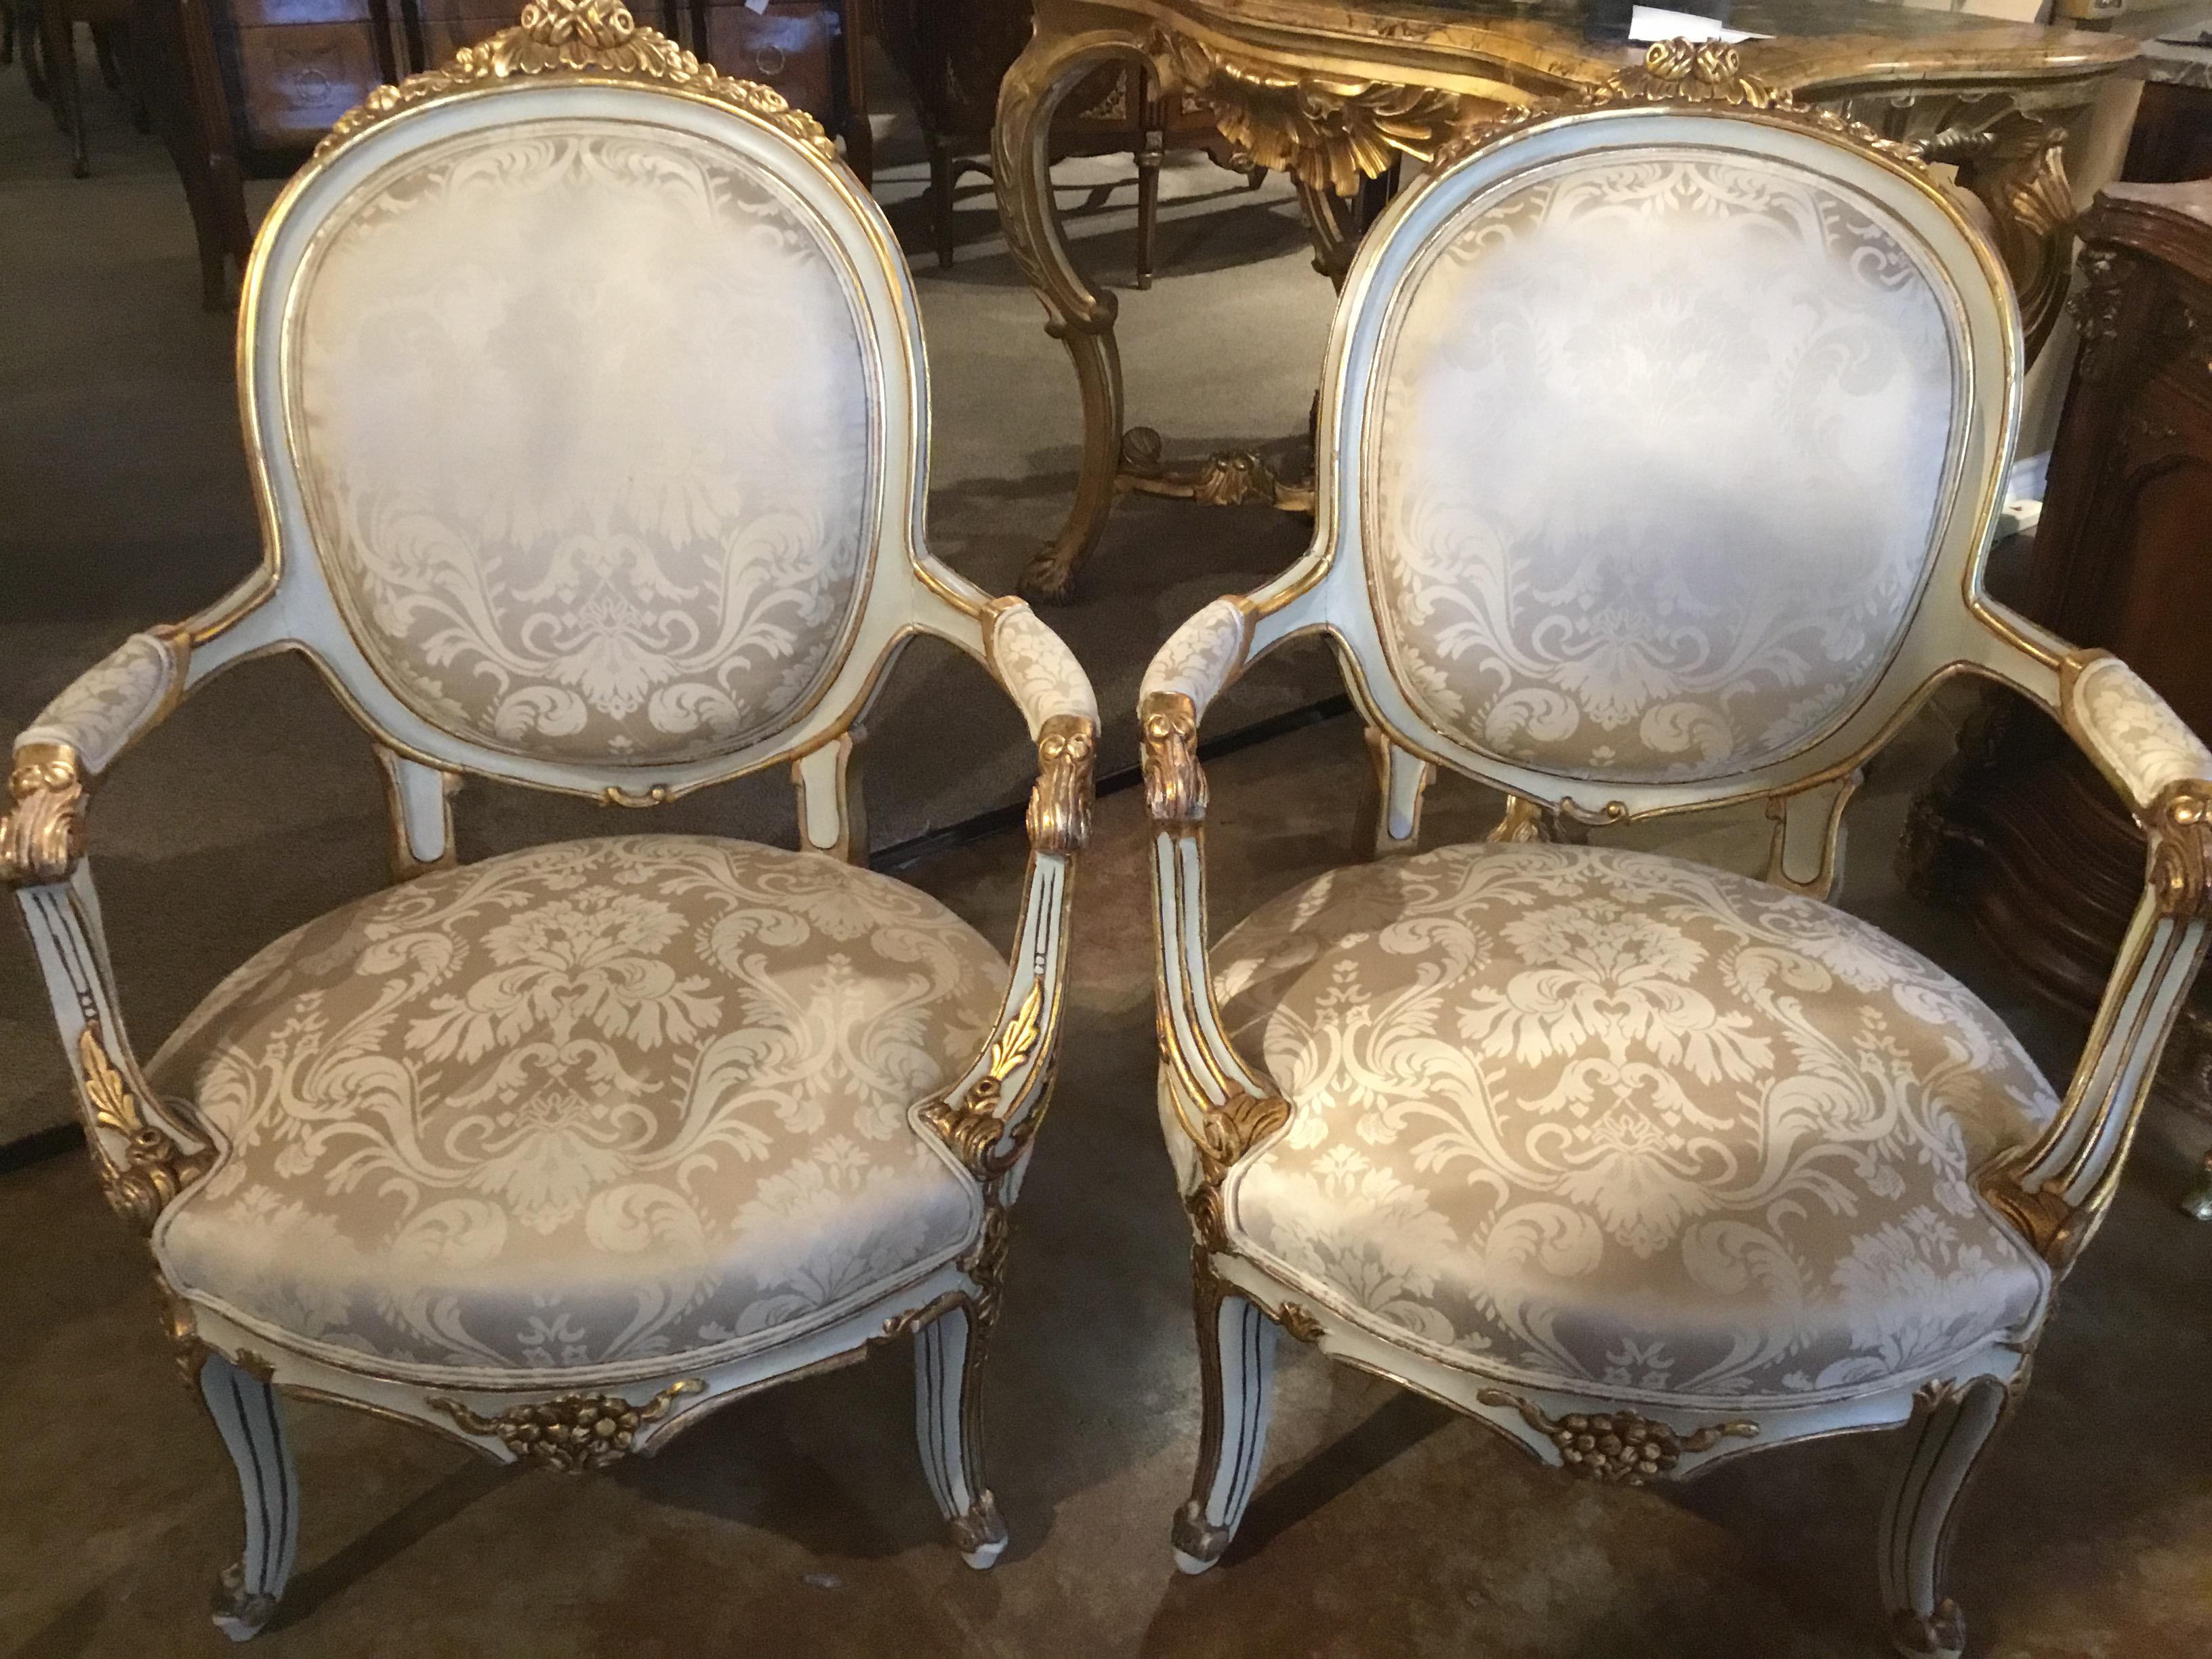 Pair of antique French parcel paint and parcel giltwood chairs with cream
Damask fabric. Carved gilt embellishments at the crest of roses and foliate
designs. The paint is a cream color.